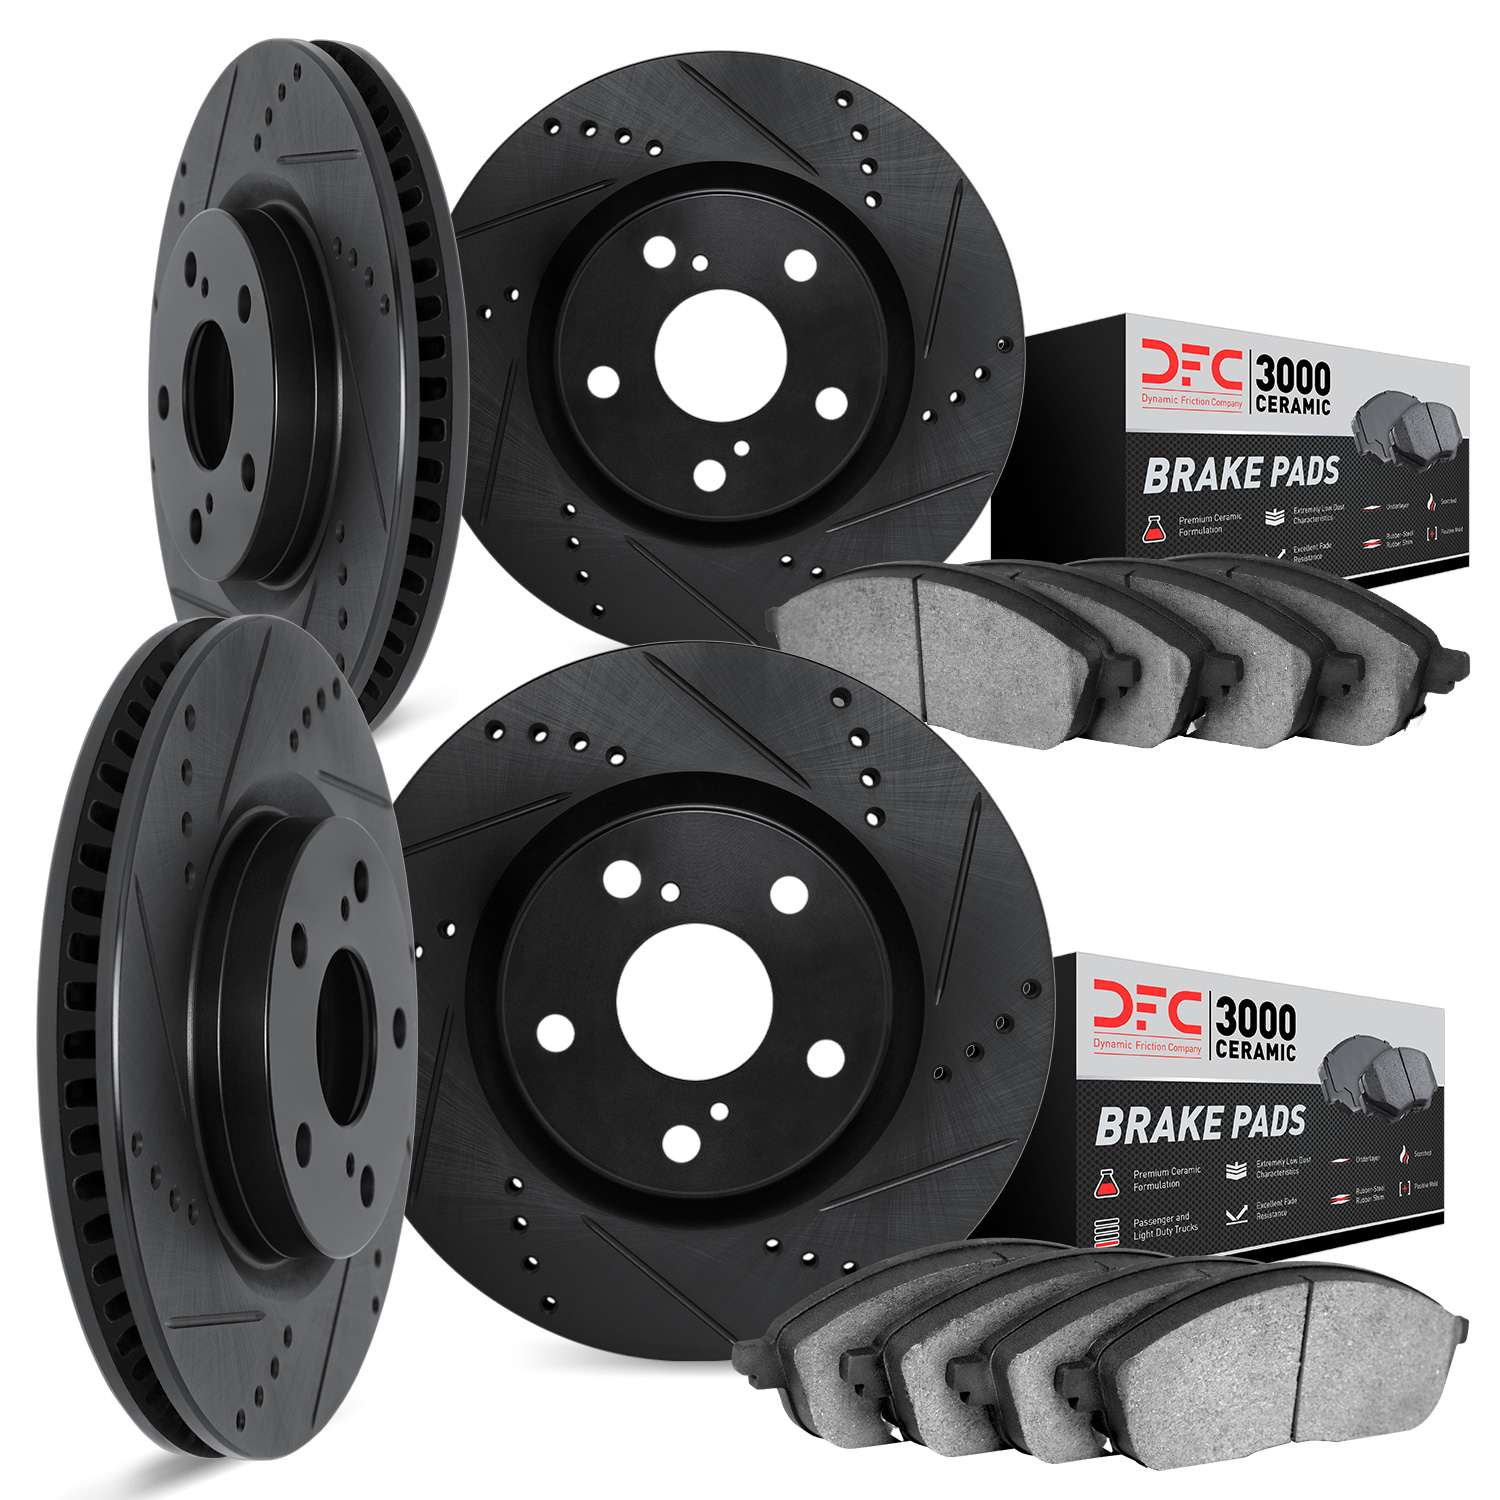 8304-31089 Drilled/Slotted Brake Rotors with 3000-Series Ceramic Brake Pads Kit [Black], 2013-2021 BMW, Position: Front and Rear